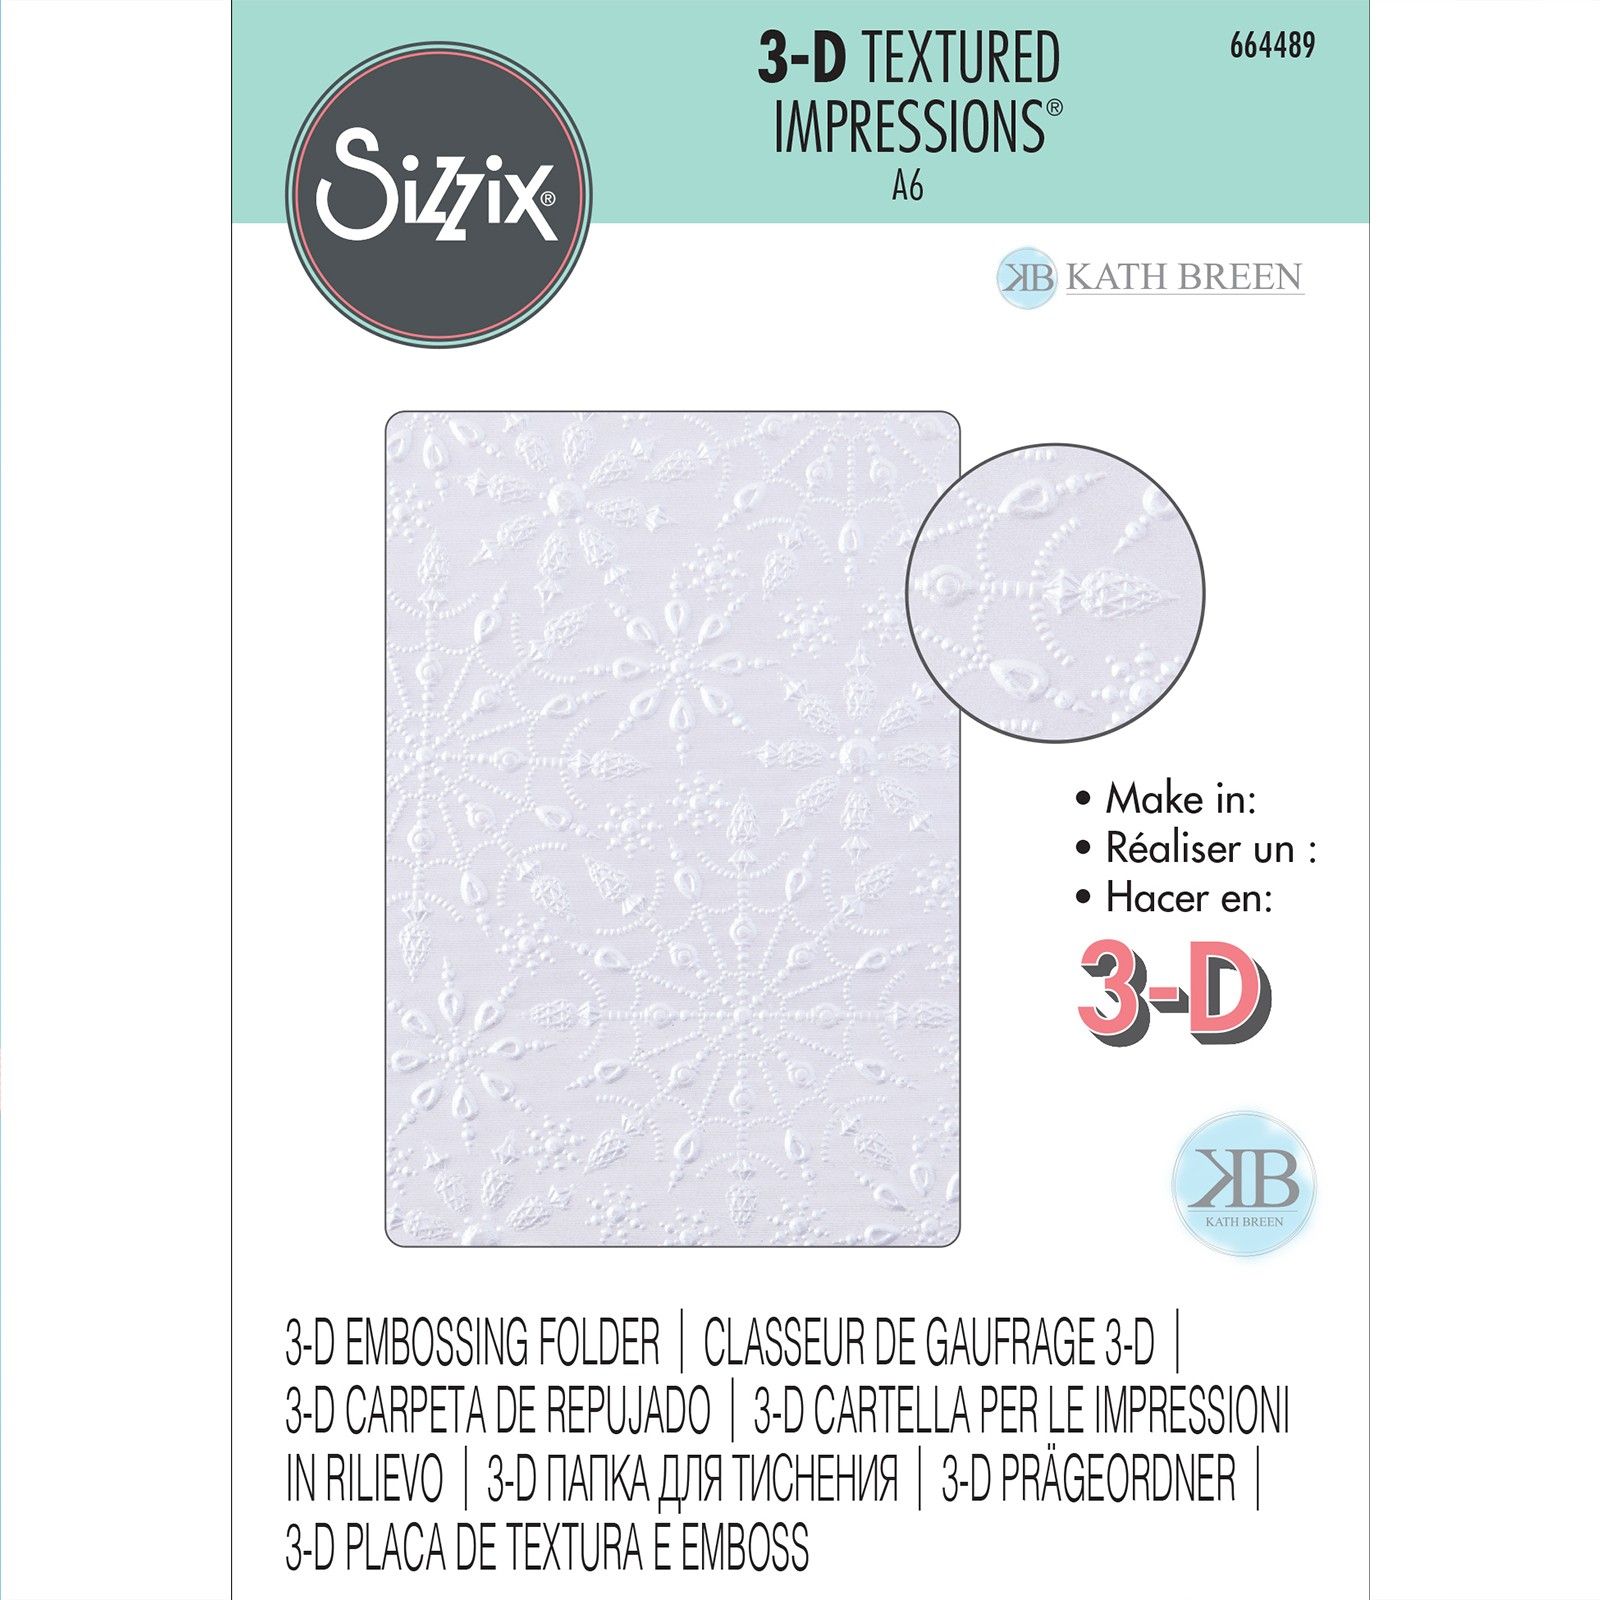 Sizzix 3-D Textured Impressions Embossing Folder By Kath Breen - Jeweled Snowflakes